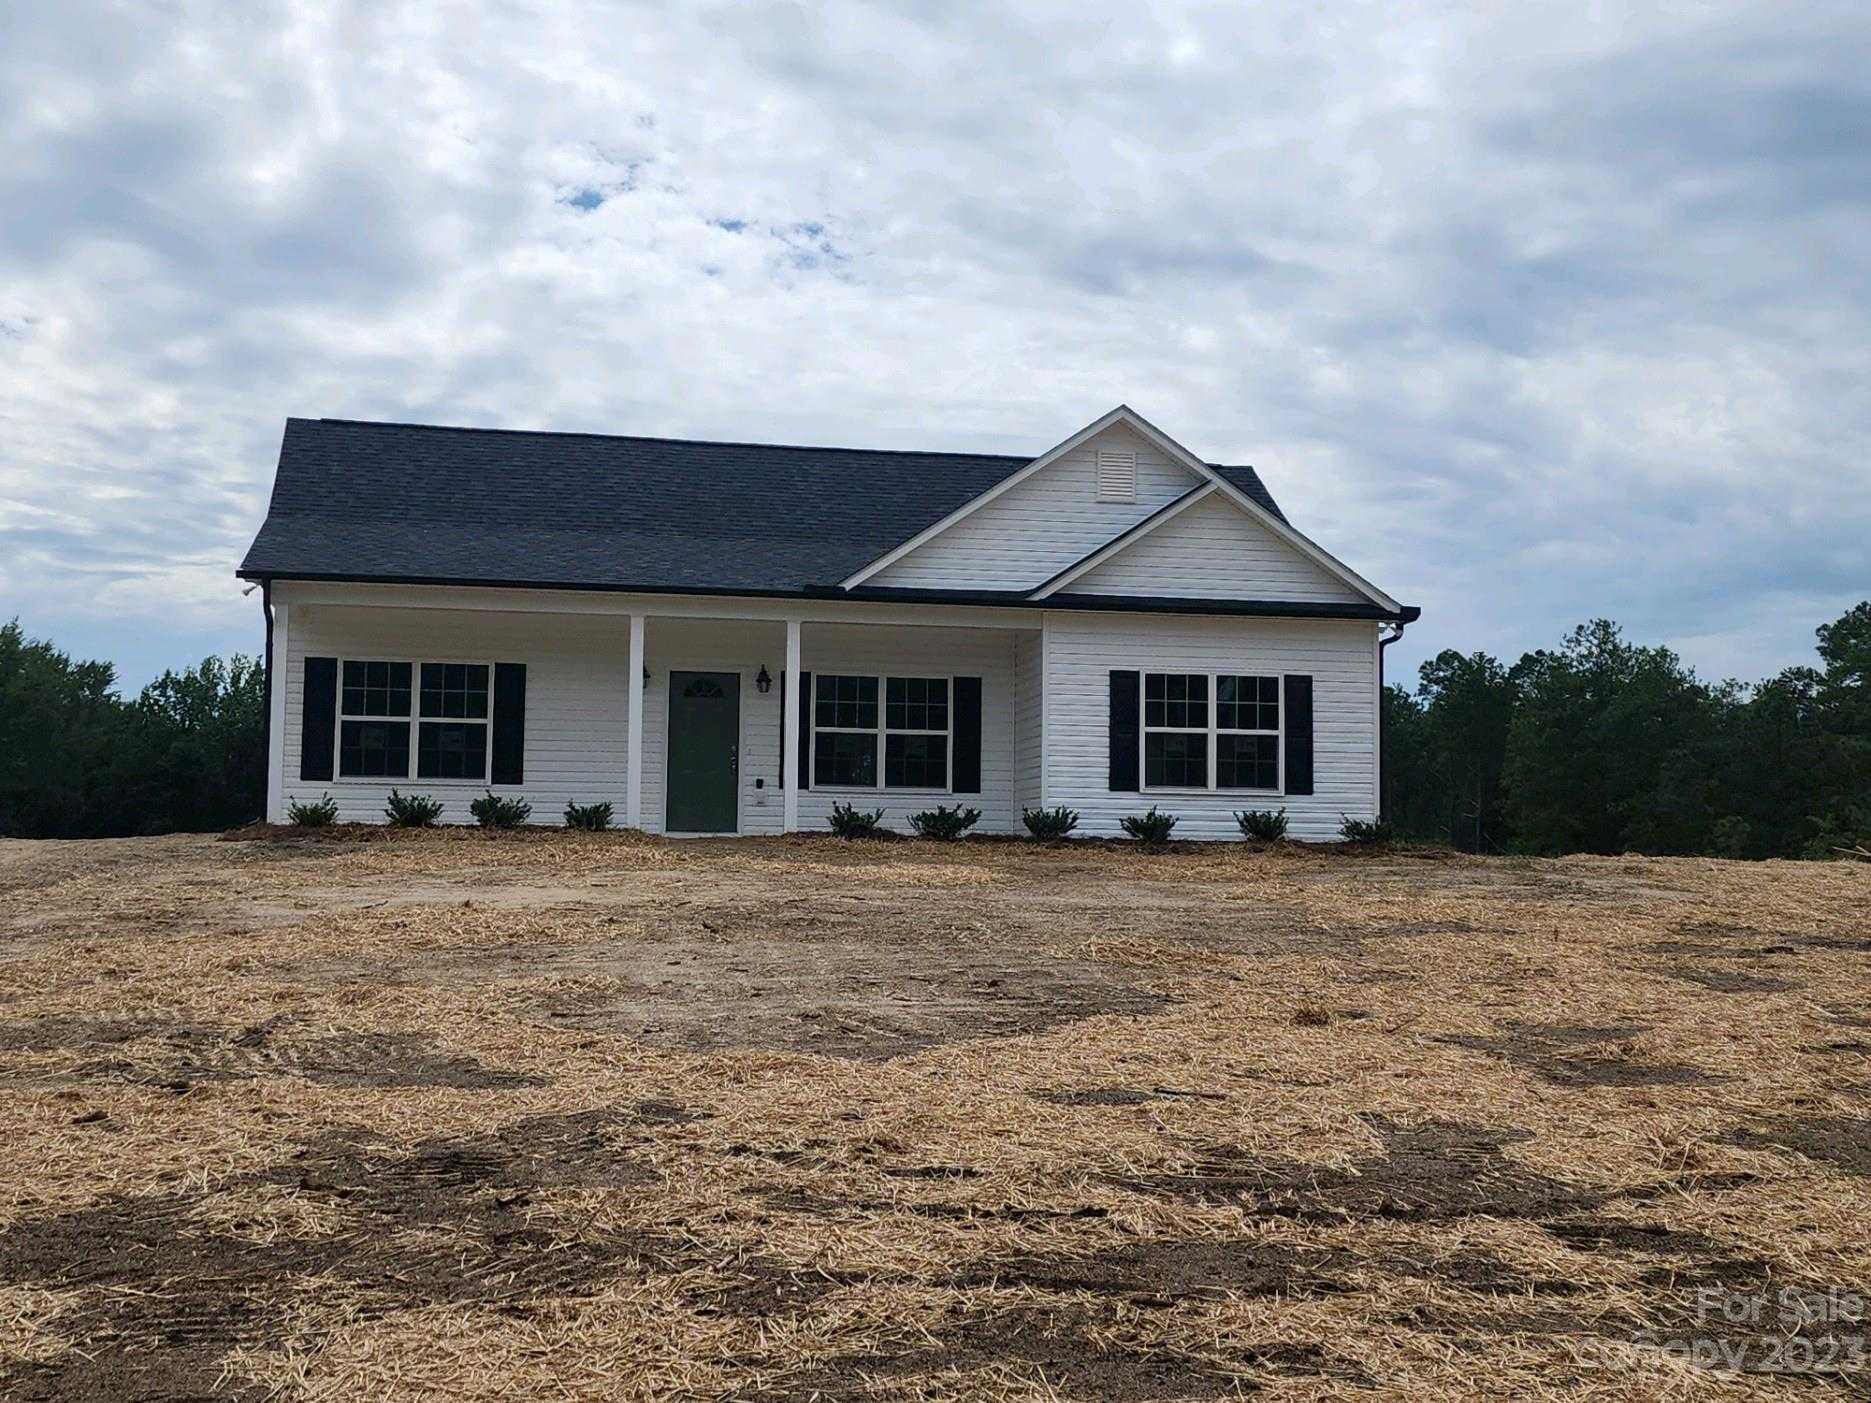 View Pageland, SC 29728 house